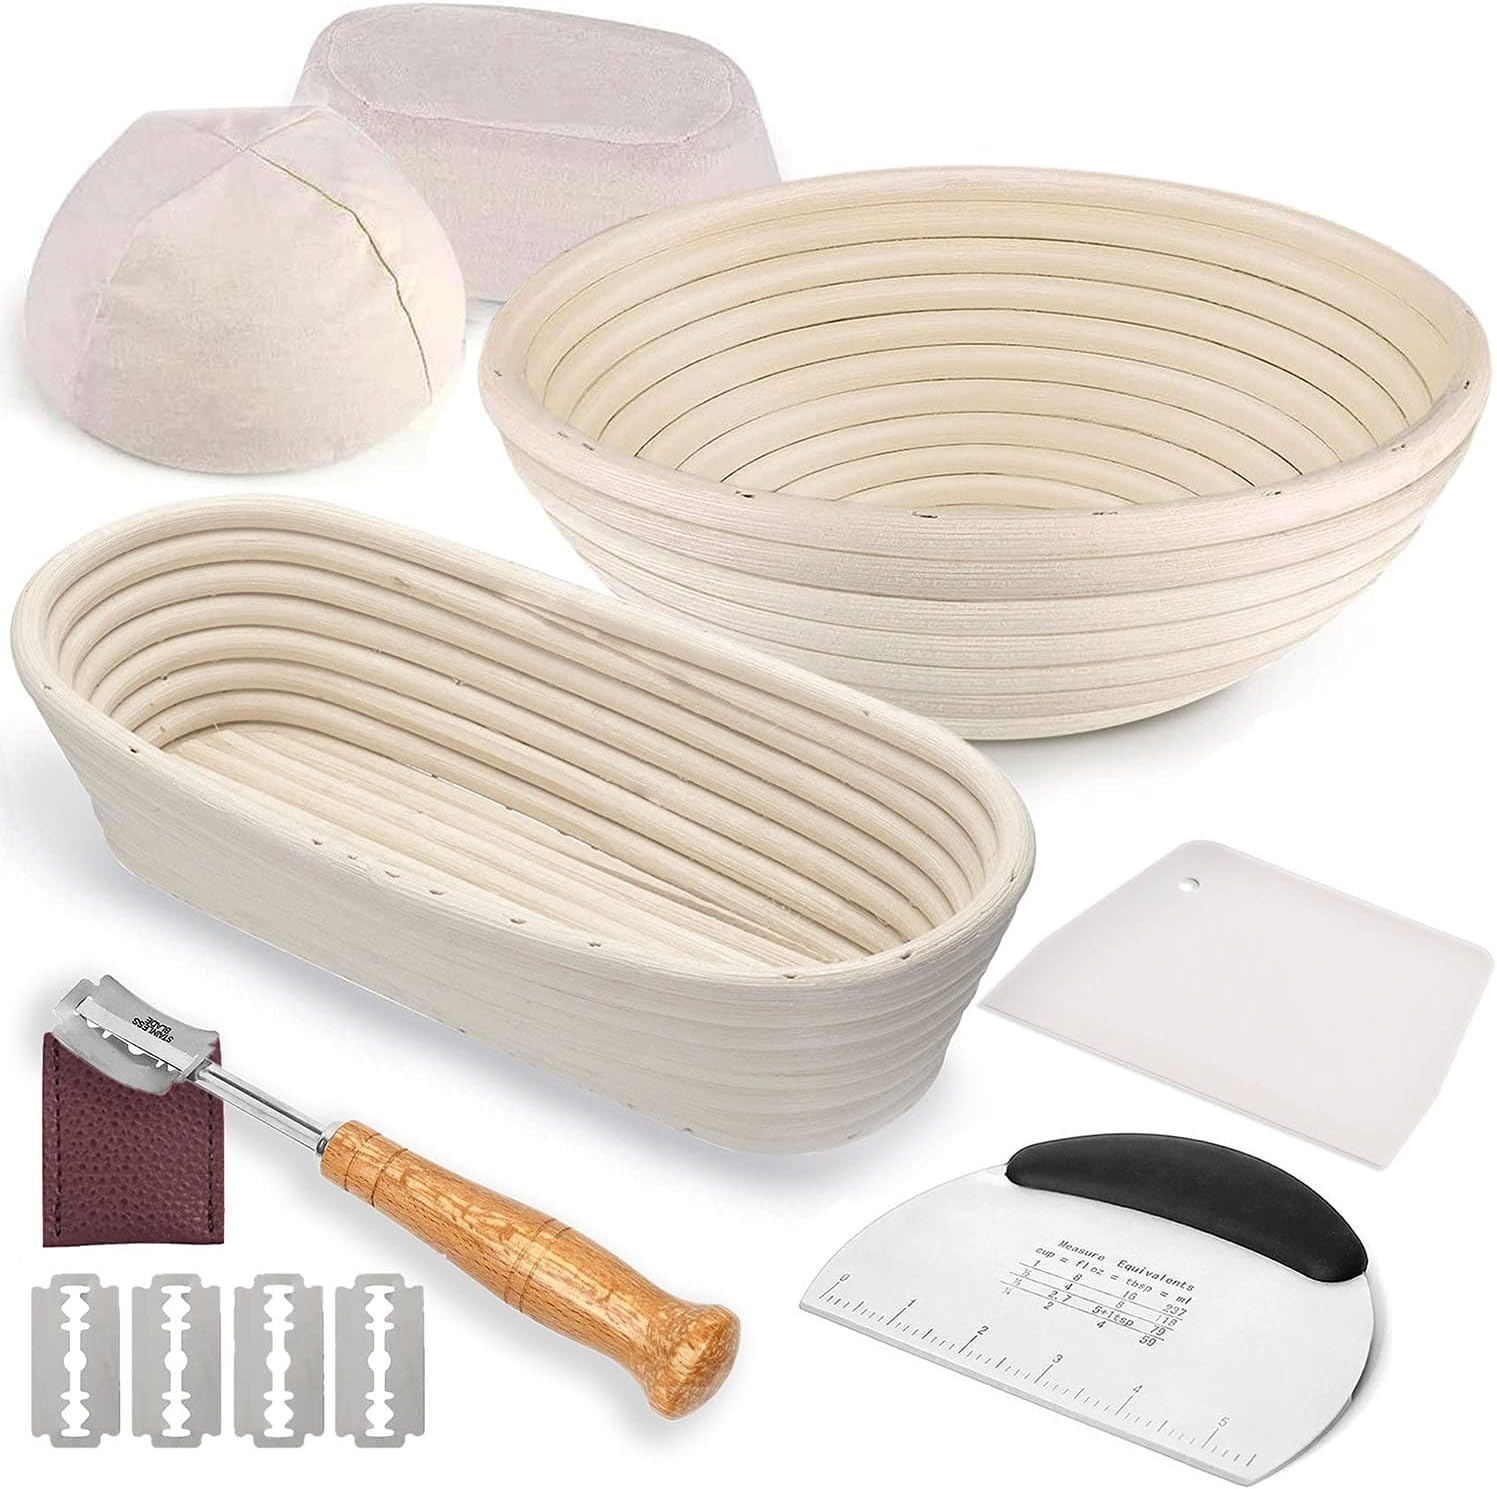 Bread Art Bread Proofing Basket set - A complete banneton basket kit of 9 Inch Round and 10 Inich Oval Banneton Proofing Baskets with Clo